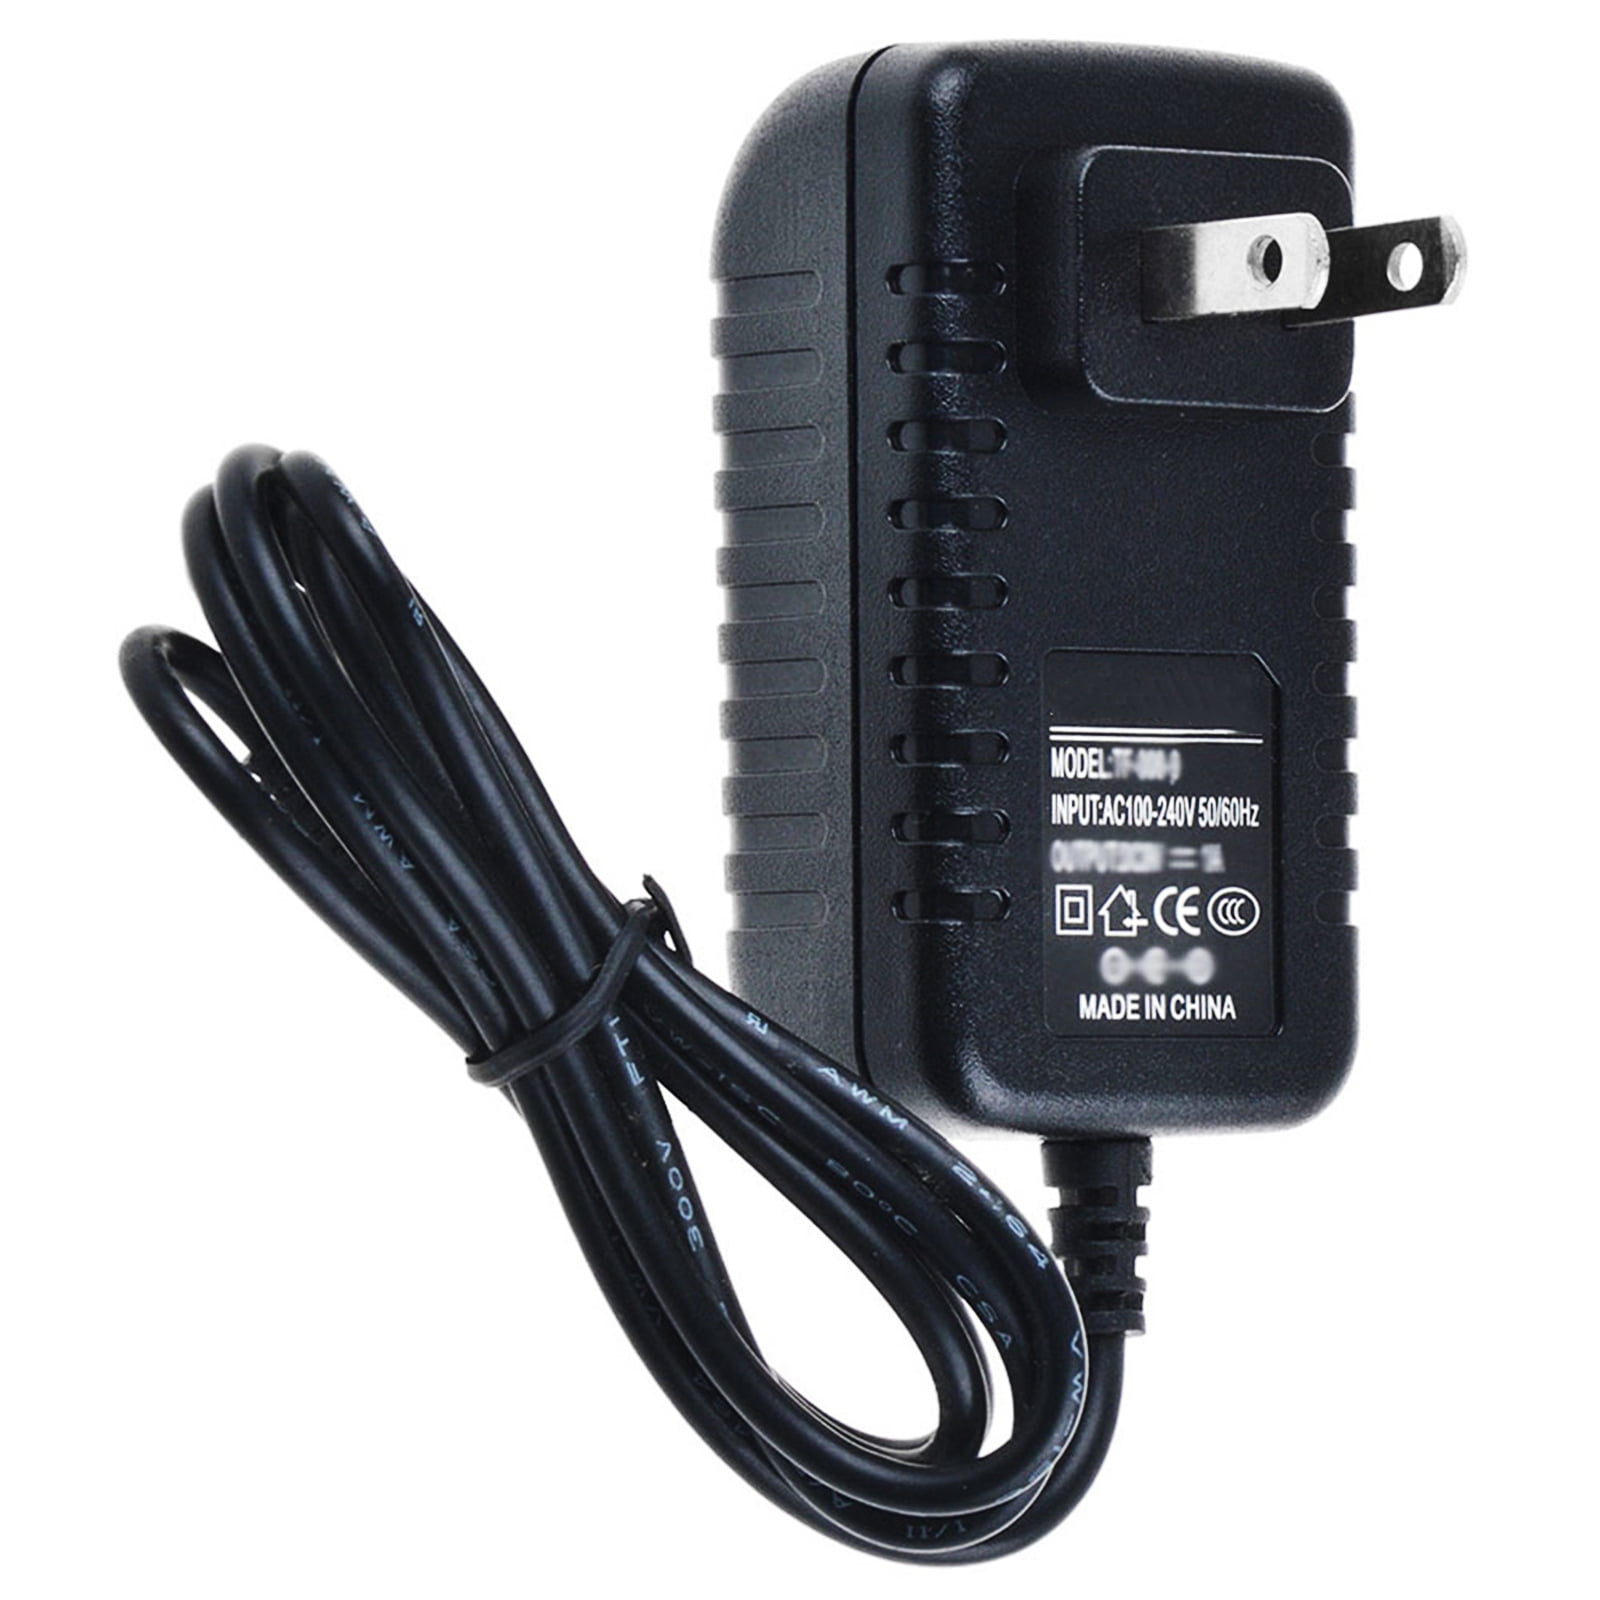 AC DC Adapter Home Wall Charger For Cisco SPA942-NA IP Phone Power Supply Cord 